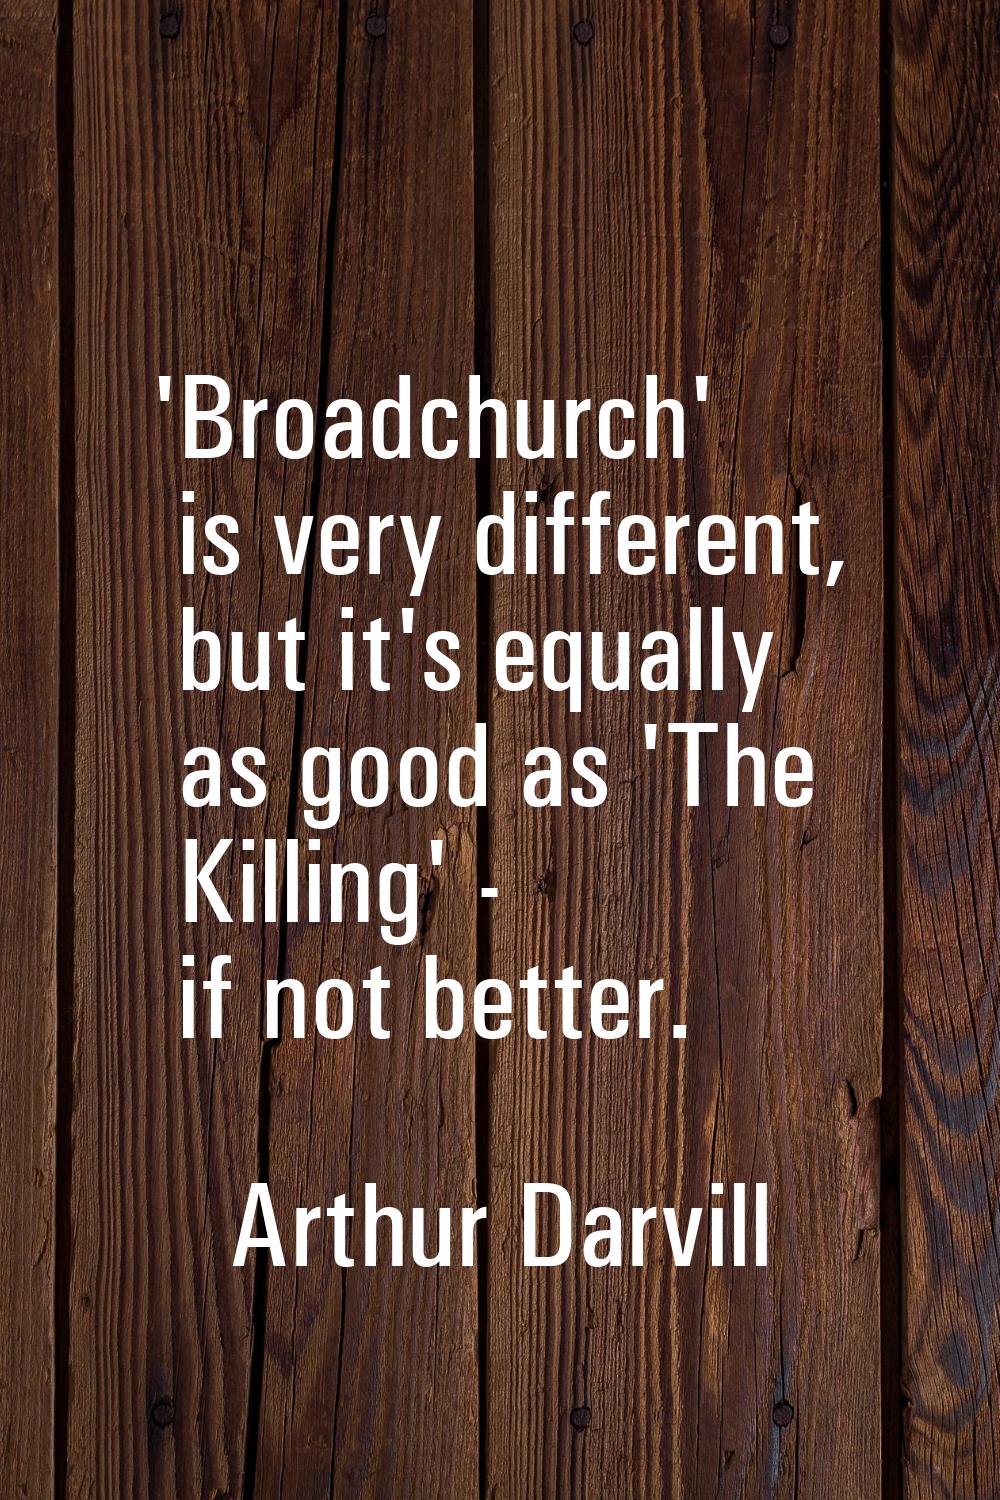 'Broadchurch' is very different, but it's equally as good as 'The Killing' - if not better.